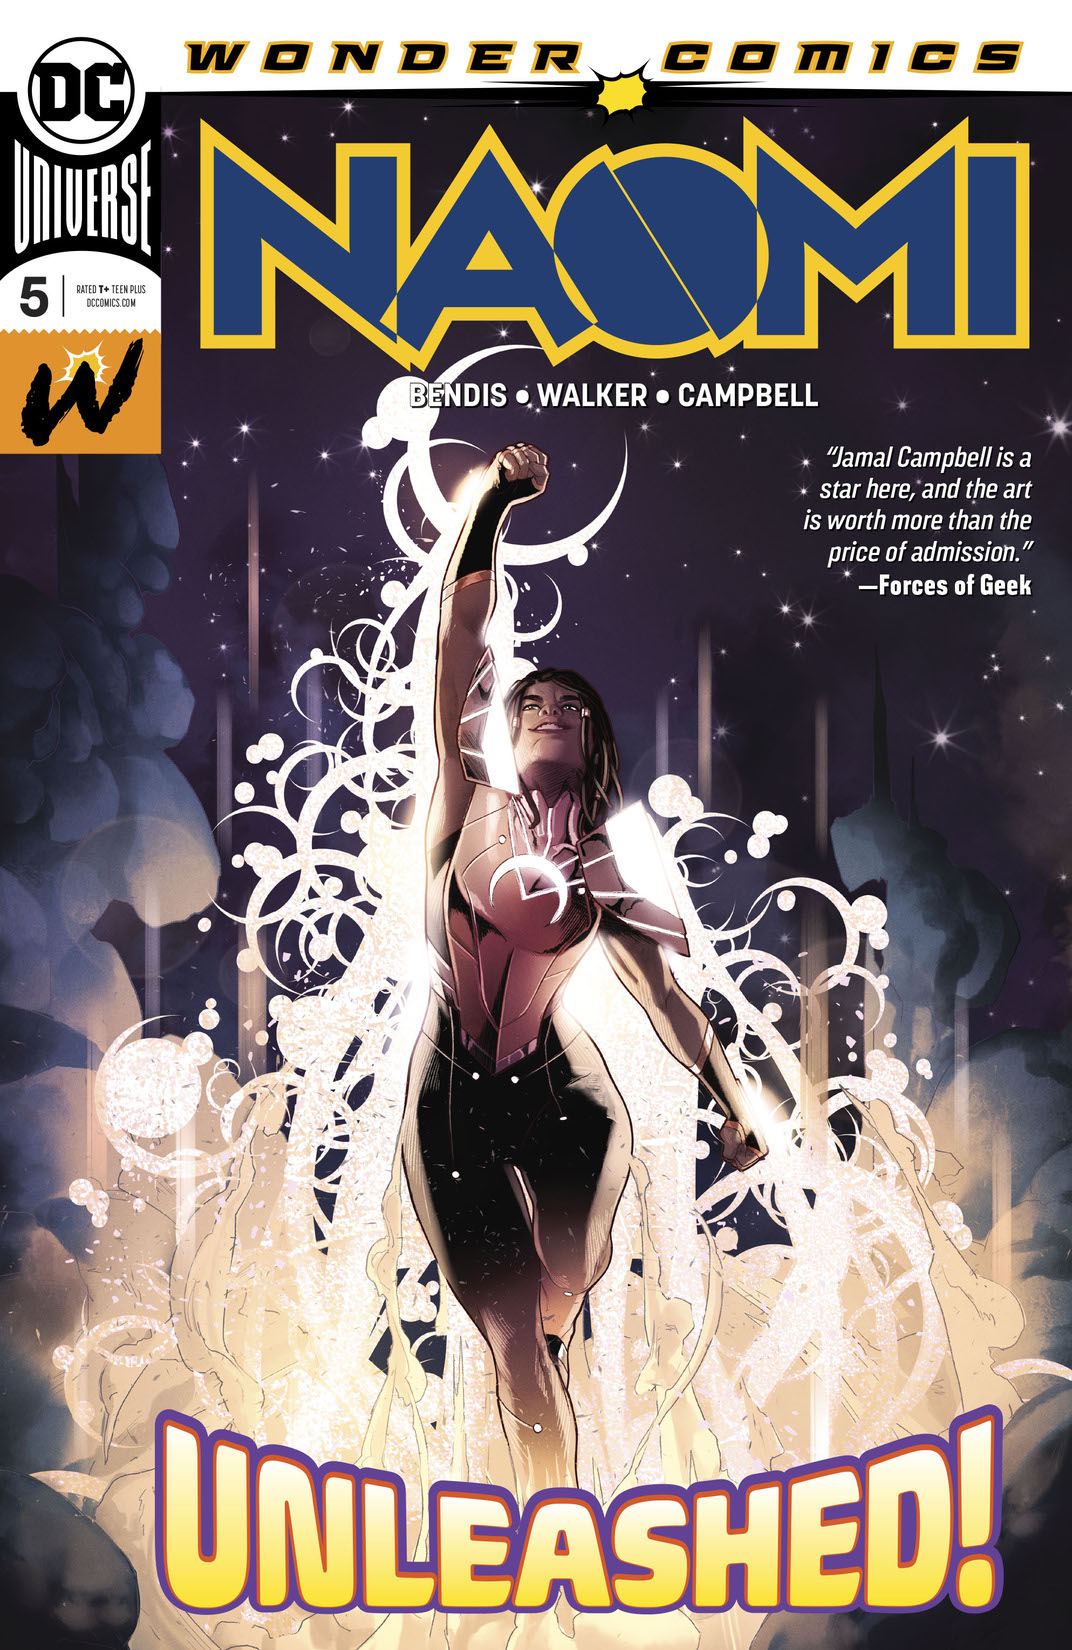 Naomi #5 preview images